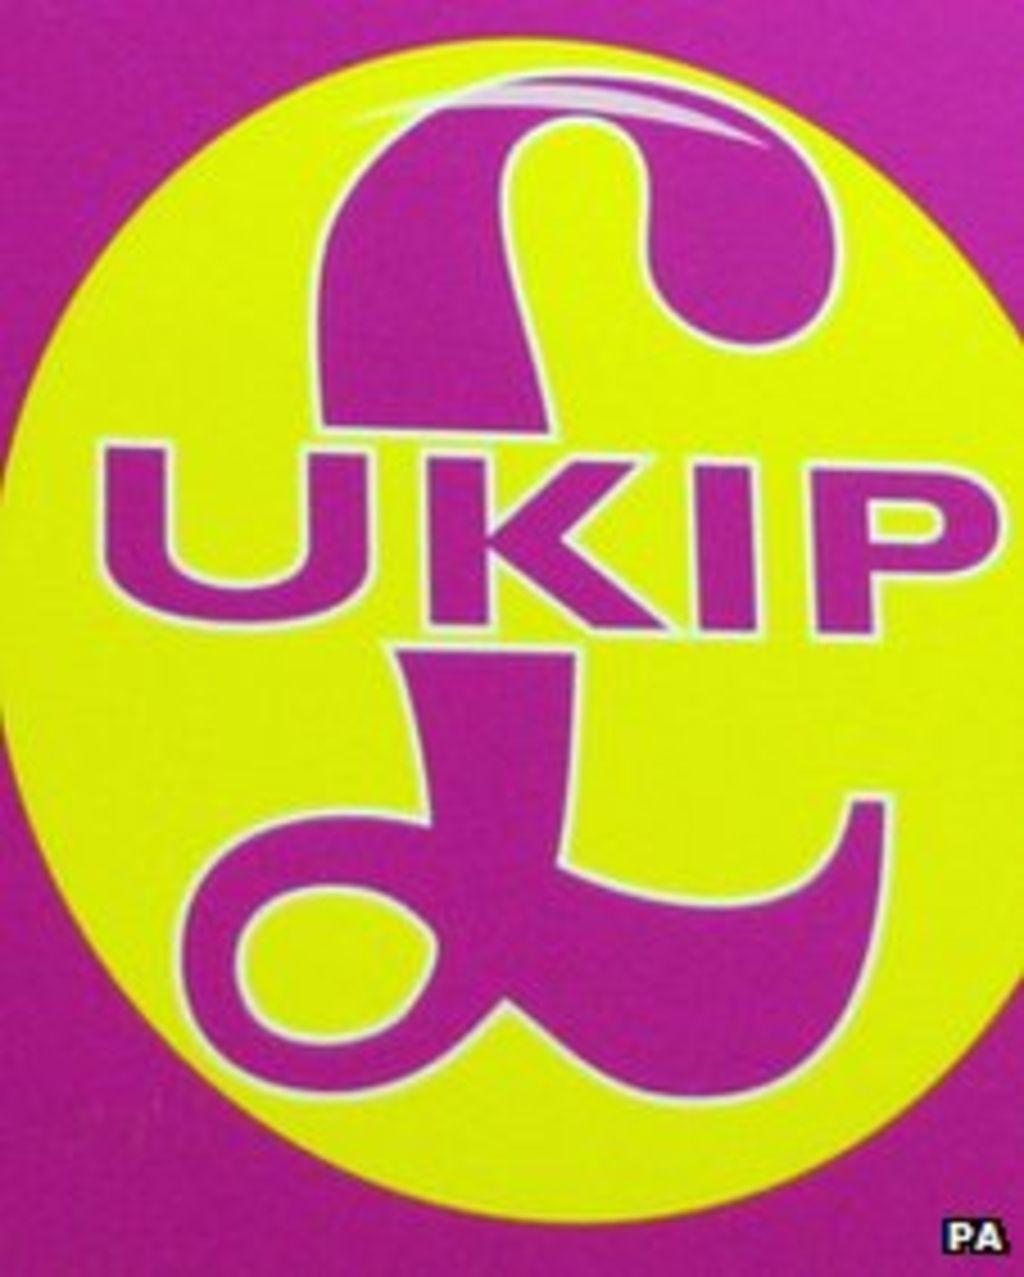 Ukip Logo - UKIP youth chairman sacked after comments on Europe and gay marriage